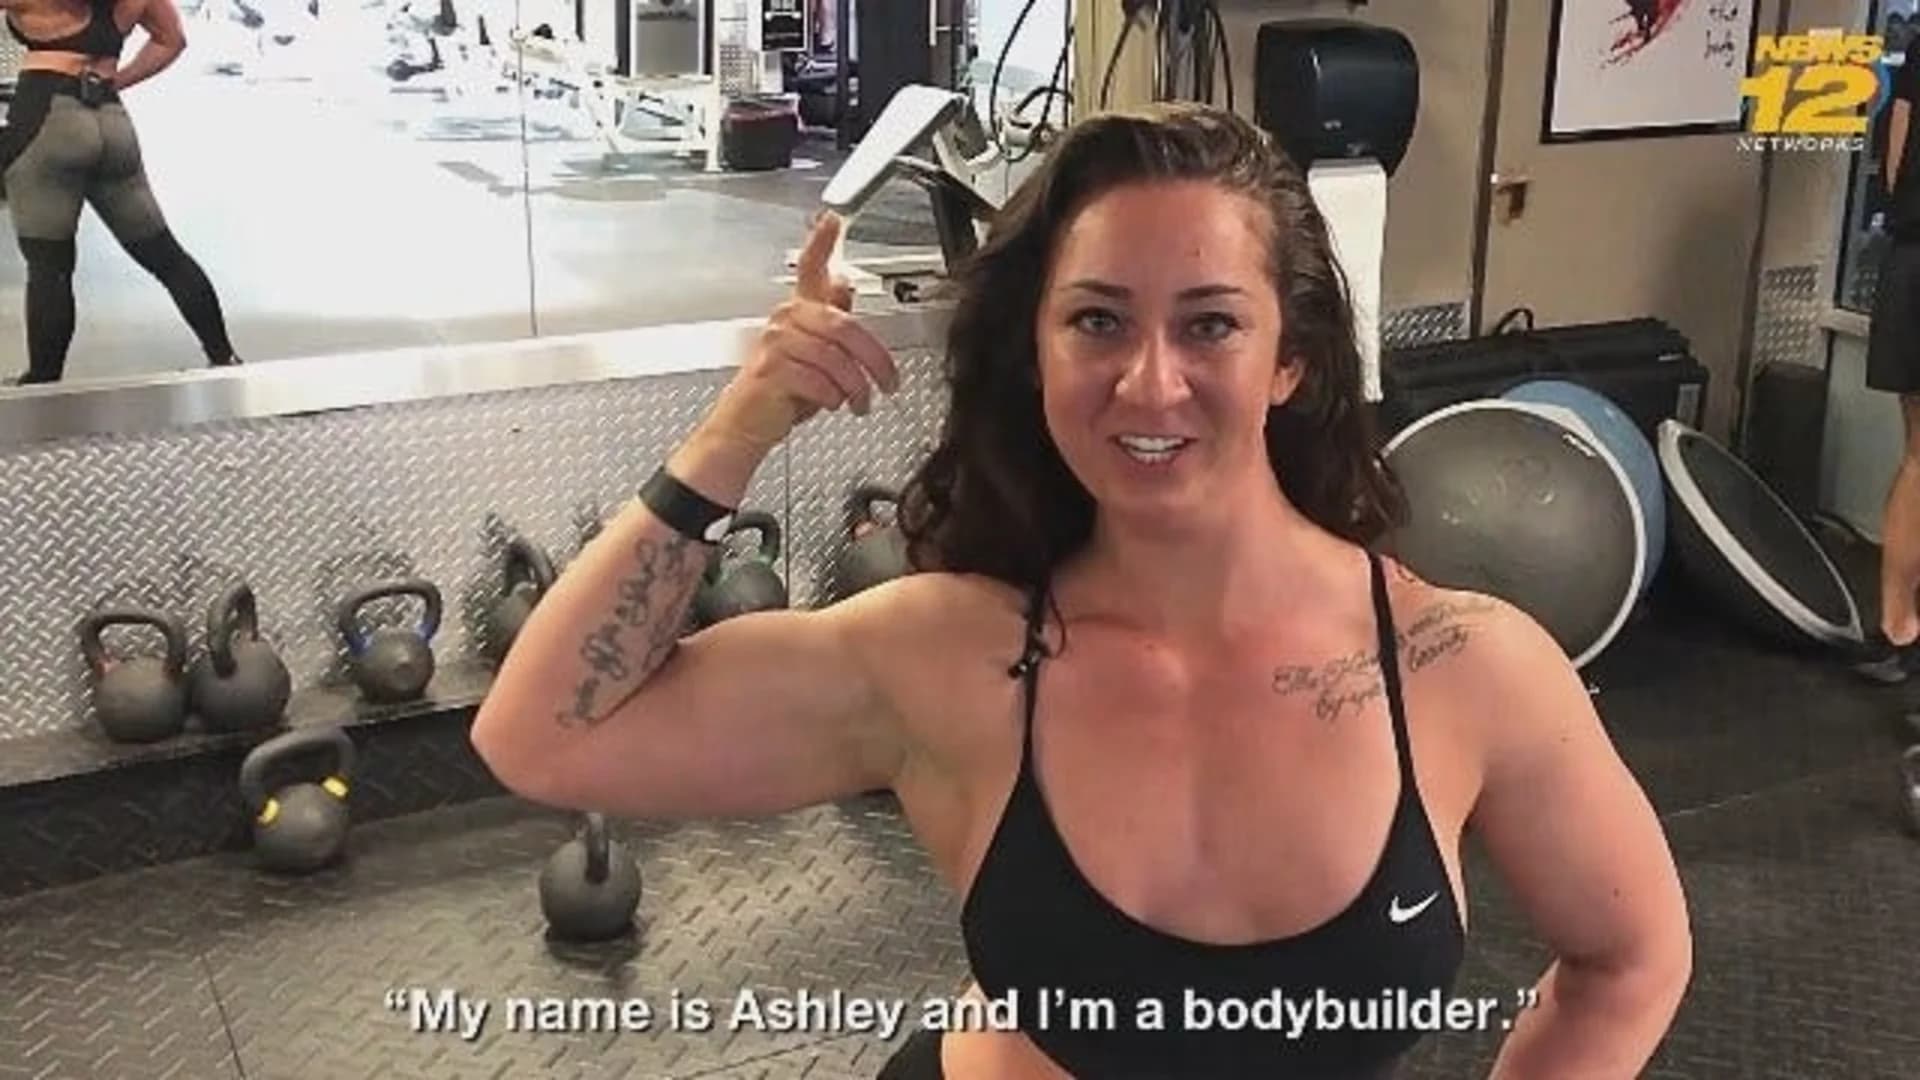 Woman overcomes disease to become a bodybuilder